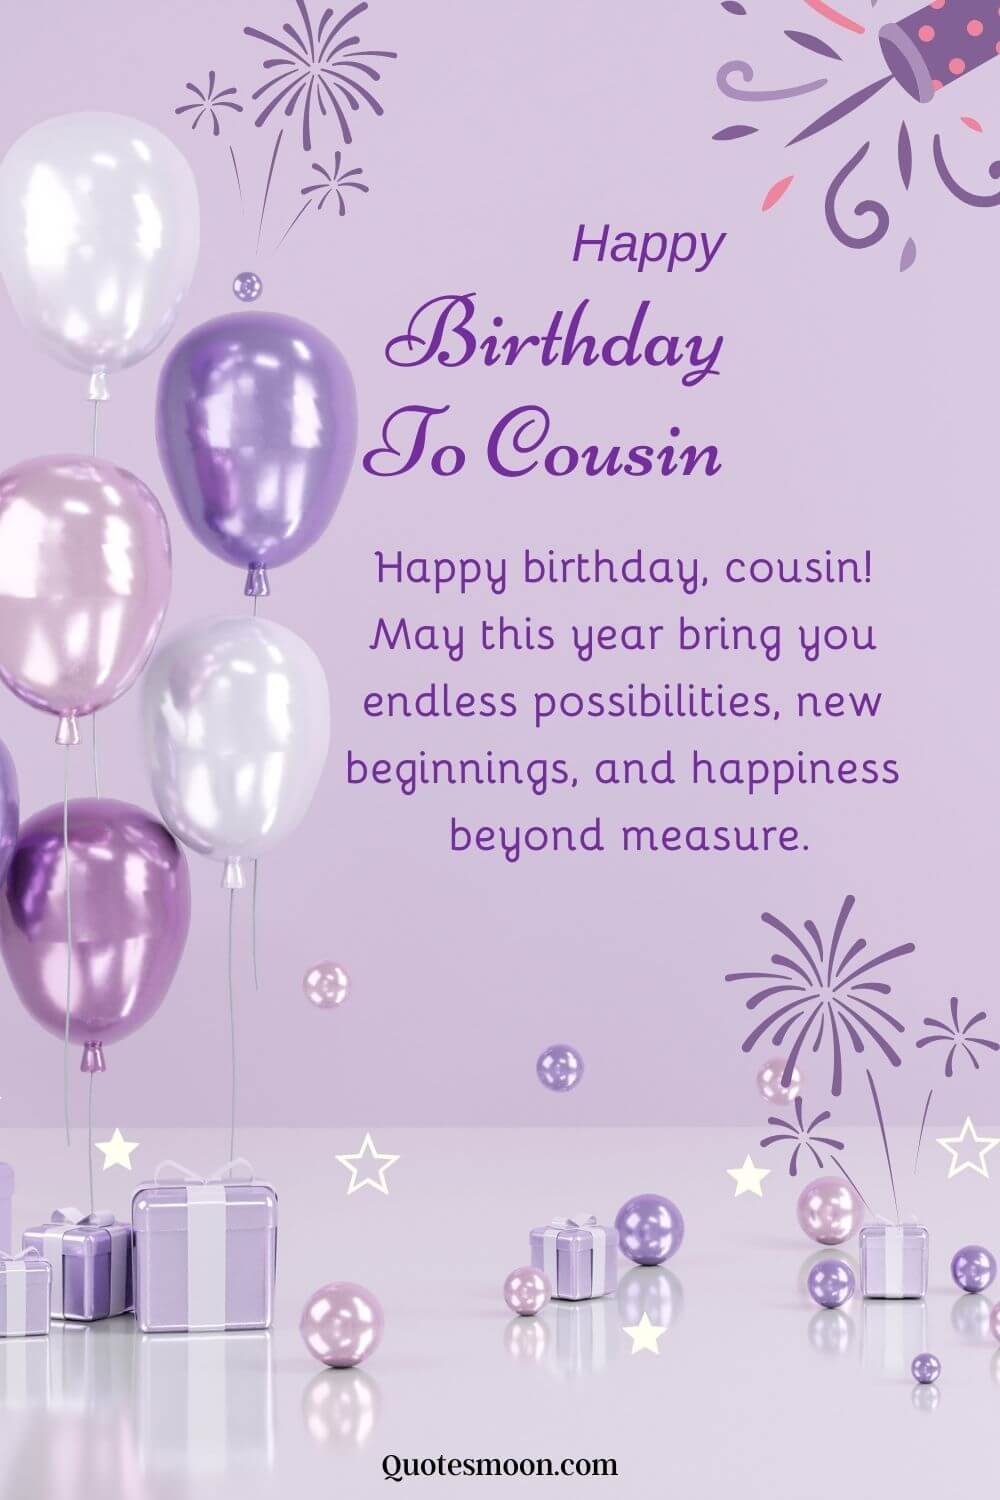 Birthday Cousin in Law Wishes and Messages pics